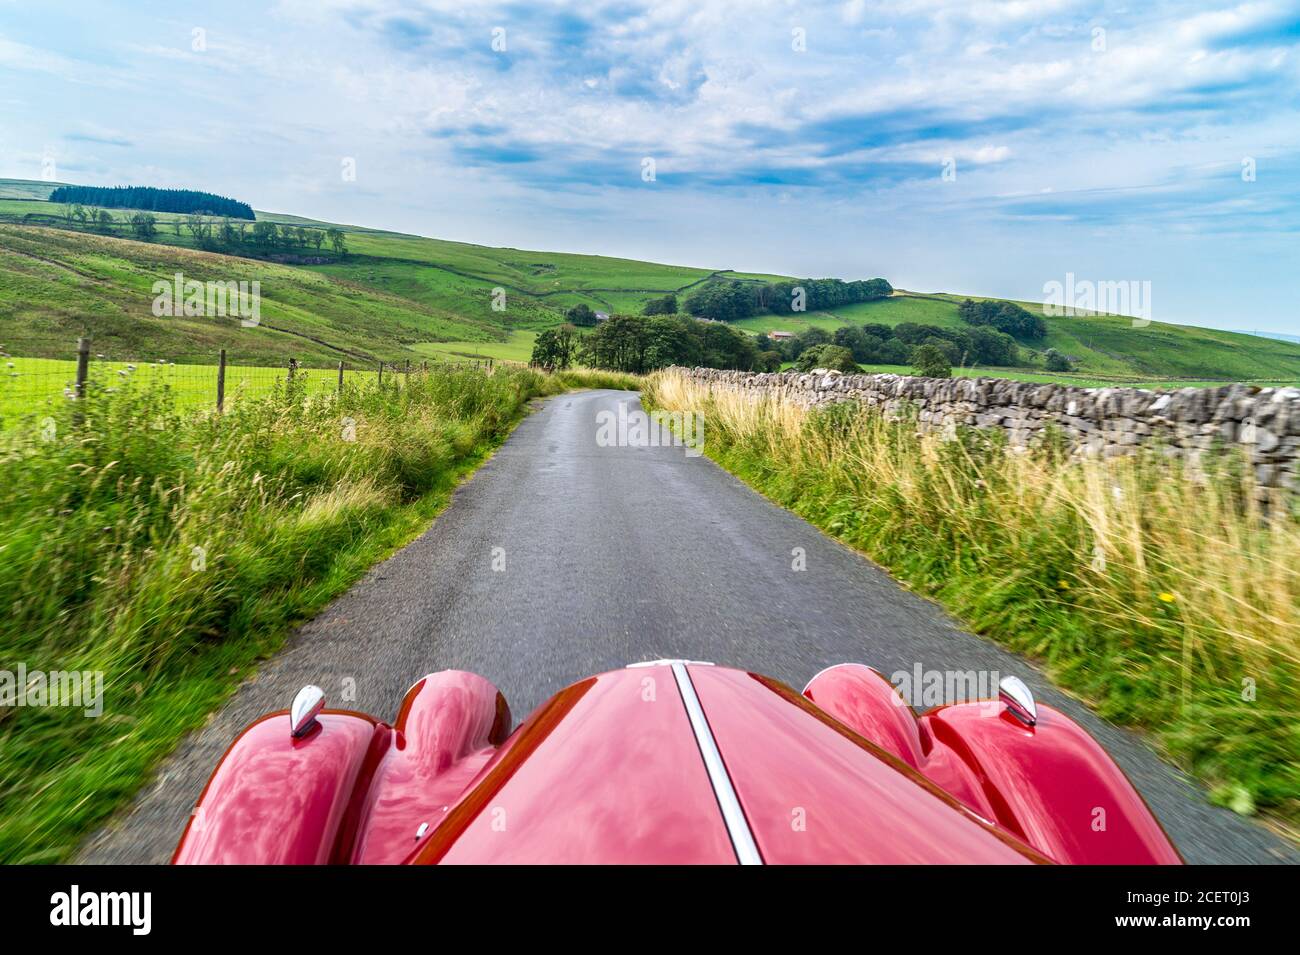 View of the road ahead, 2003 model Morgan 4/4 drop-head coupé sports car, Stainforth, North Yorkshire, England Stock Photo